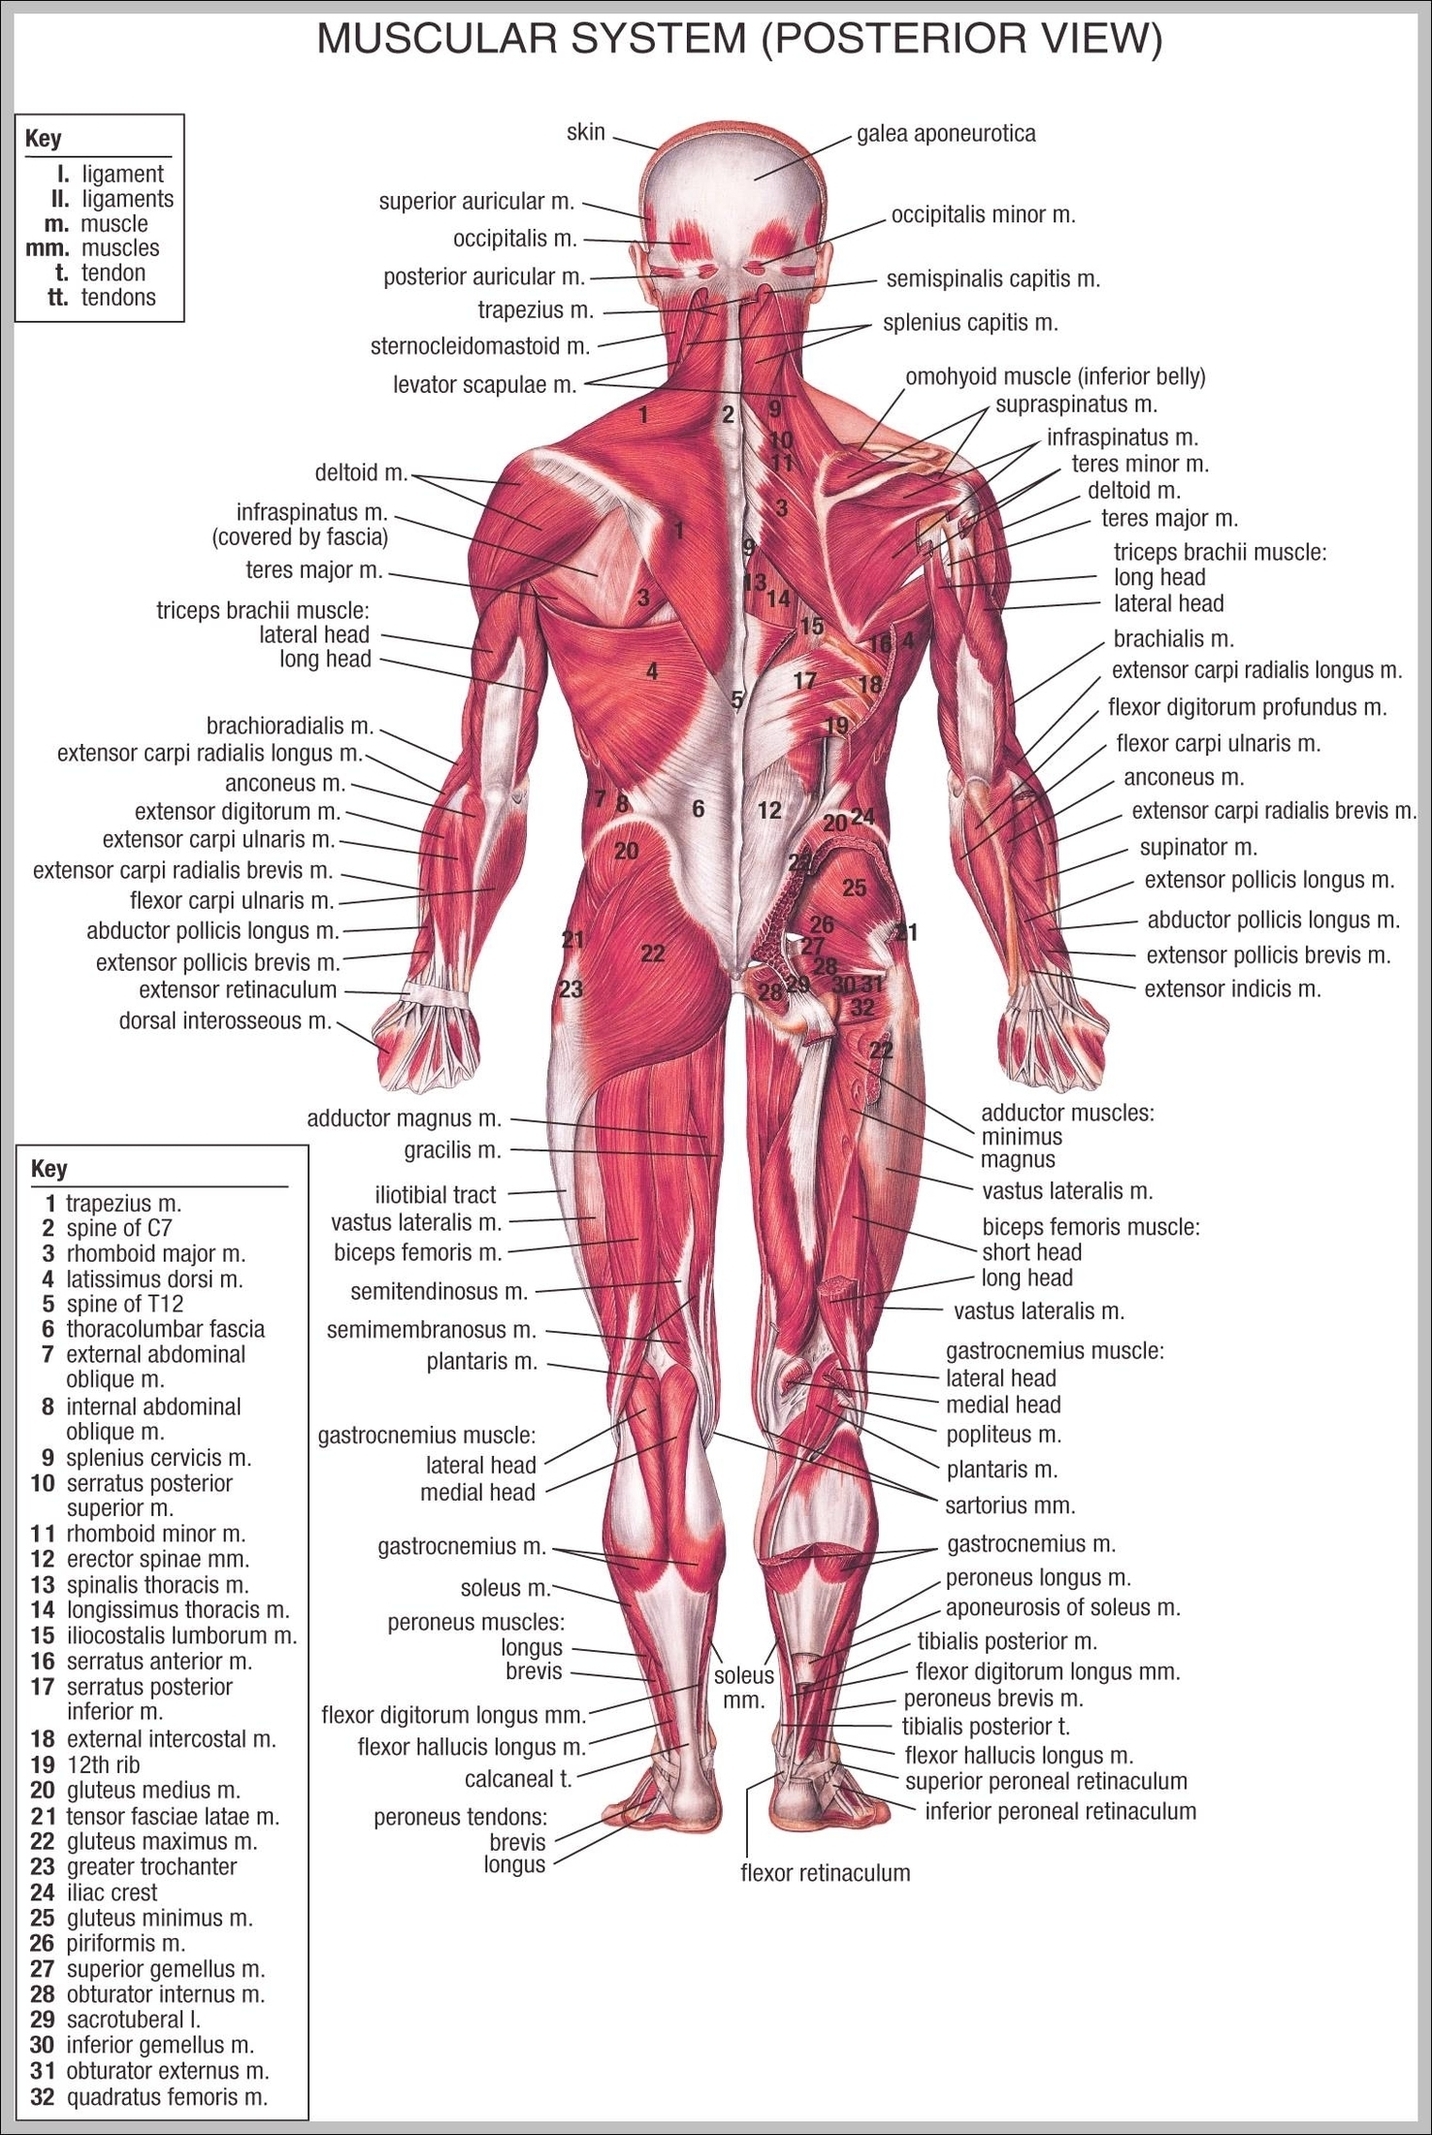 Muscular System Parts Image